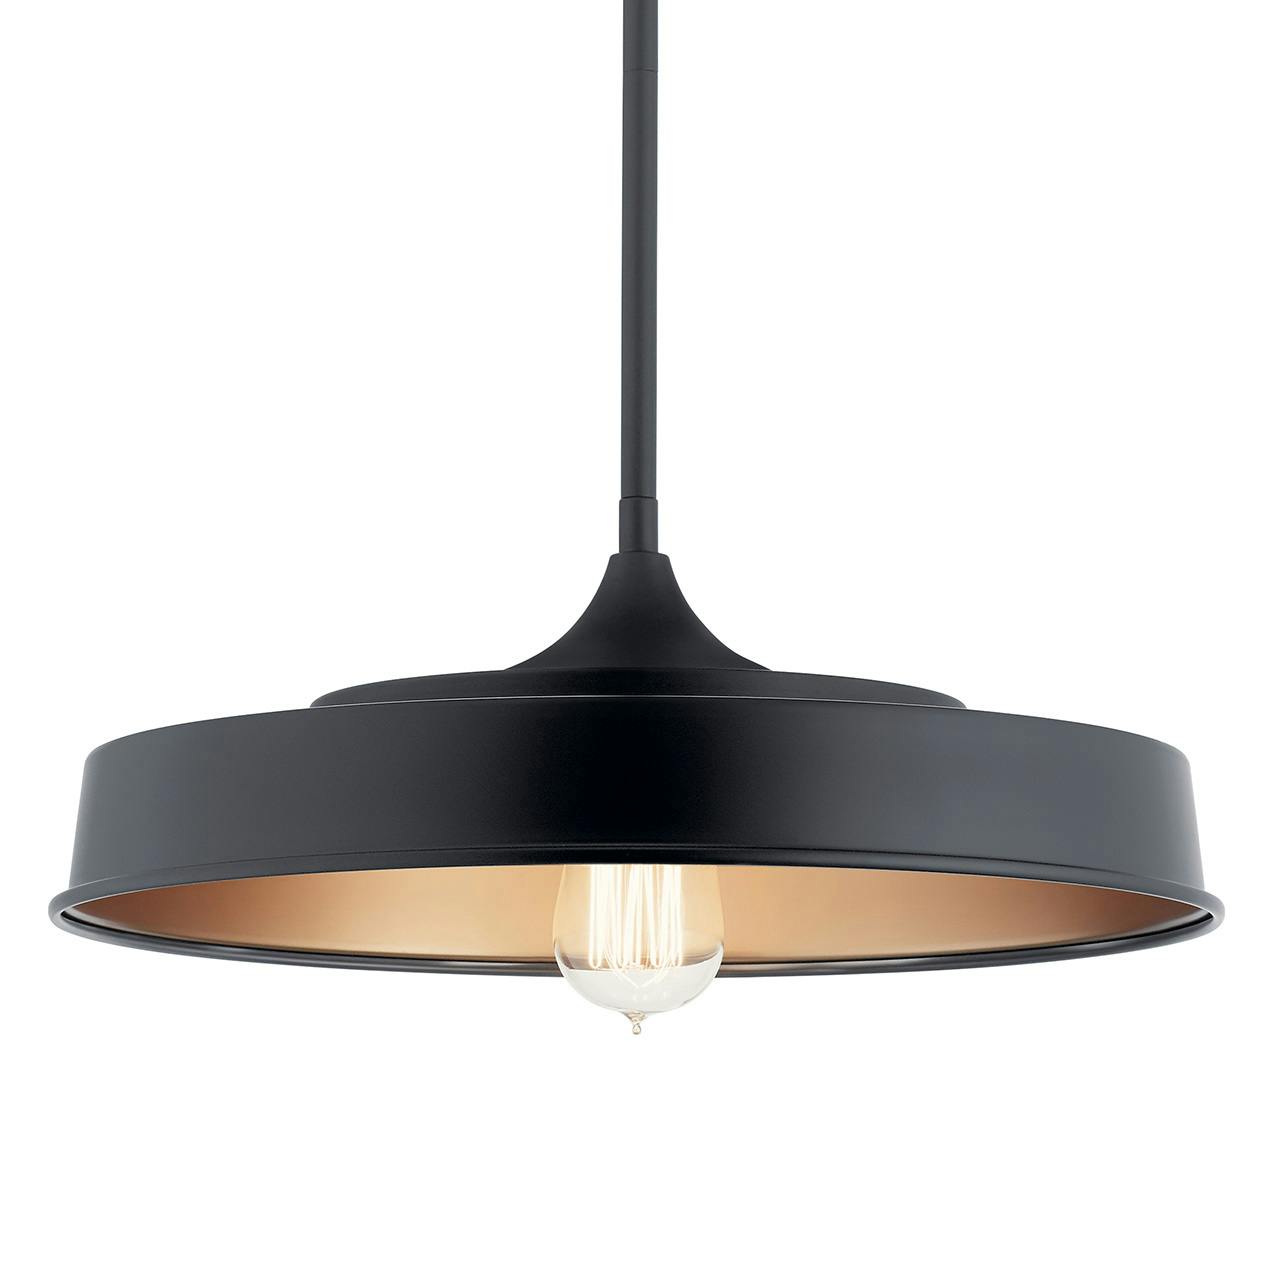 Elias 16" 1 Light Semi Flush Black without the canopy on a white background